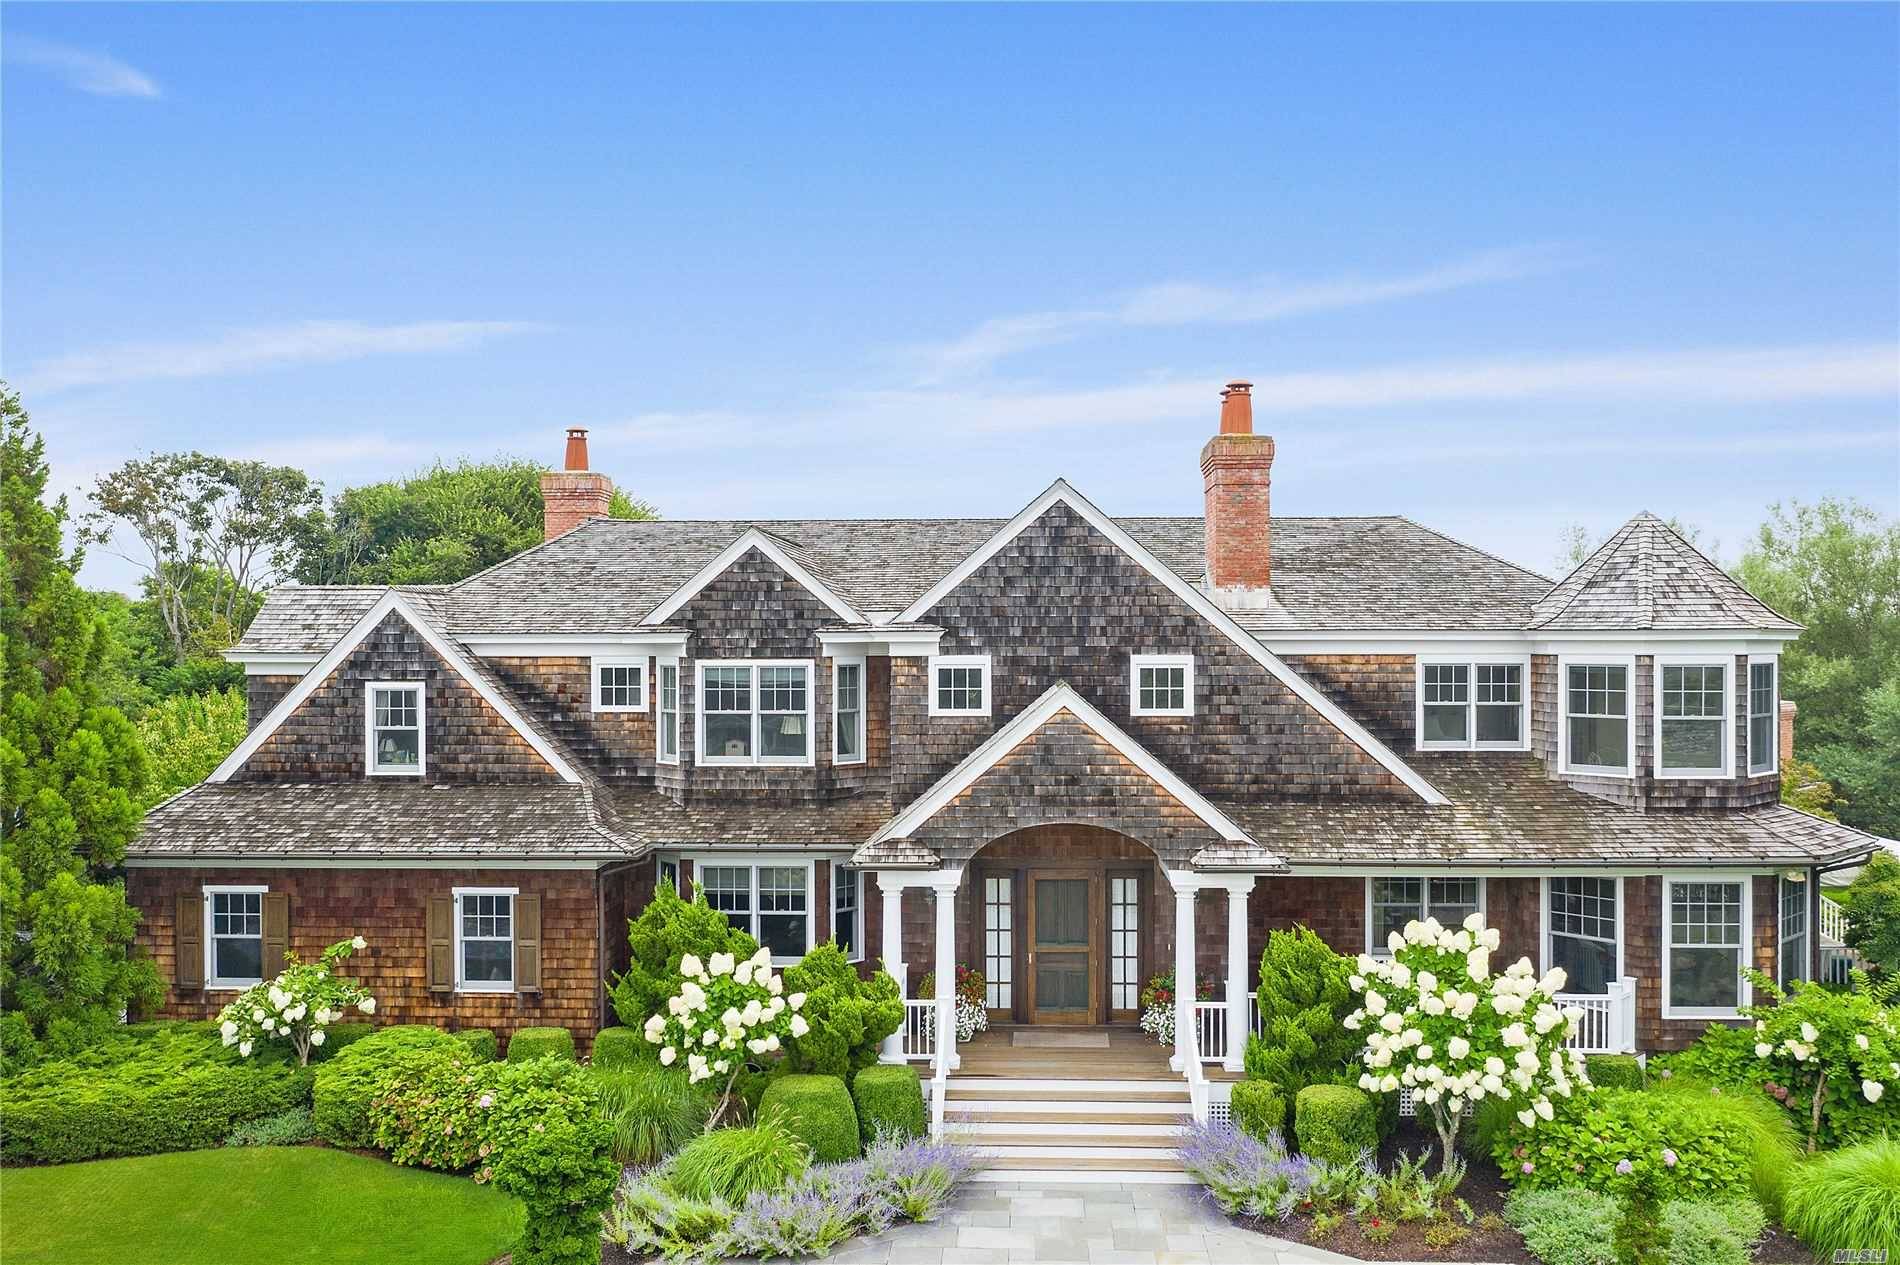 On one of the most desirable streets in the estate section of Quogue, this custom built home offers luxurious living in a private setting.